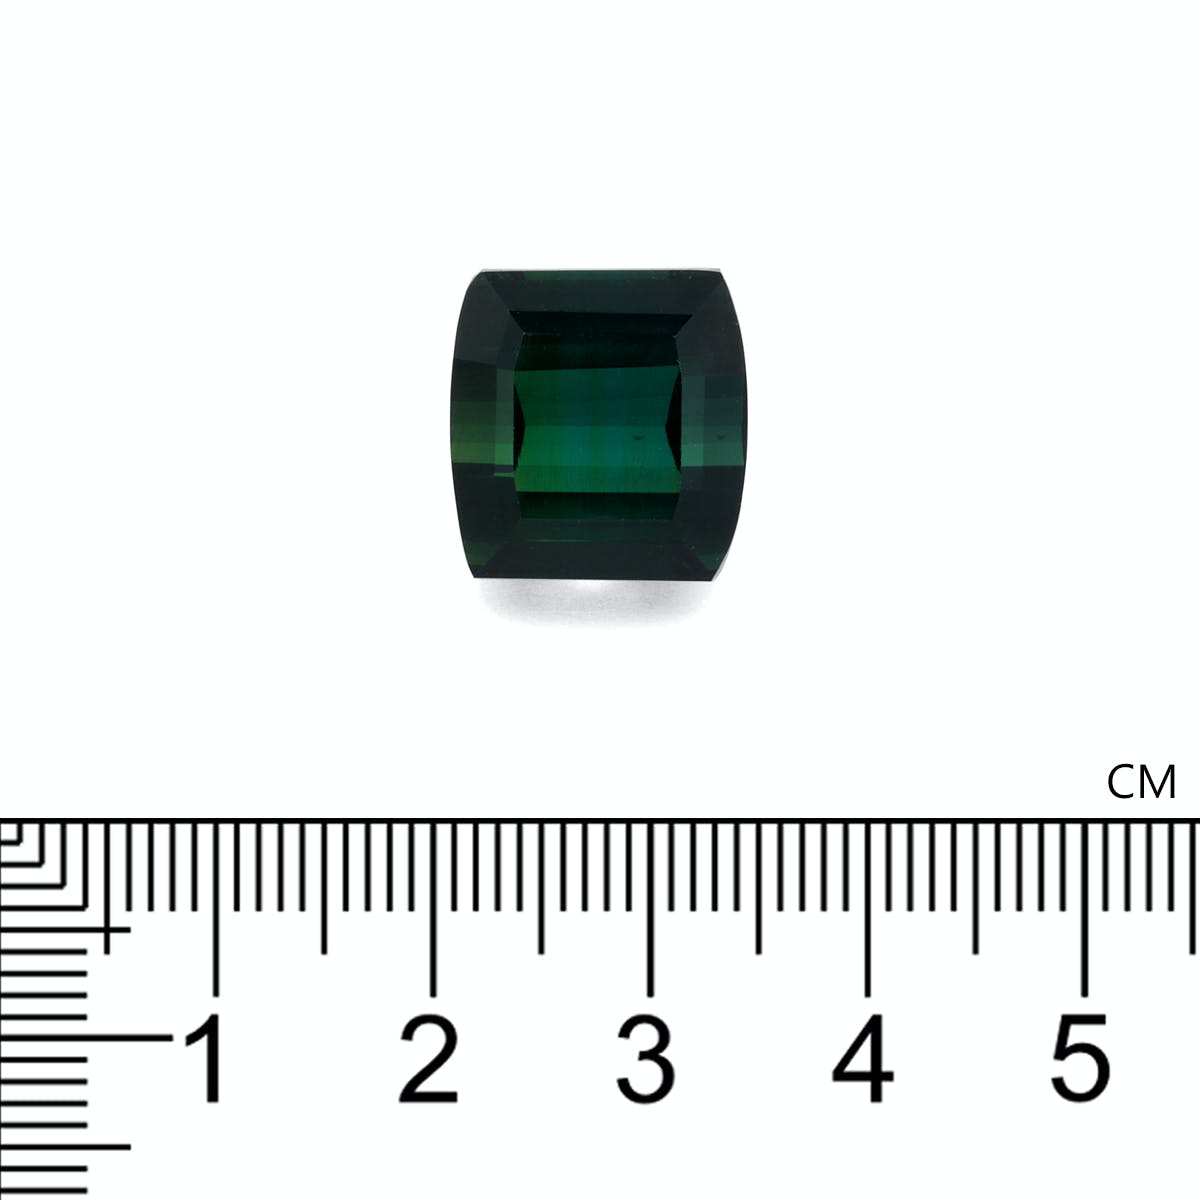 Picture of Ocean Blue Tourmaline 22.19ct (TG0151)